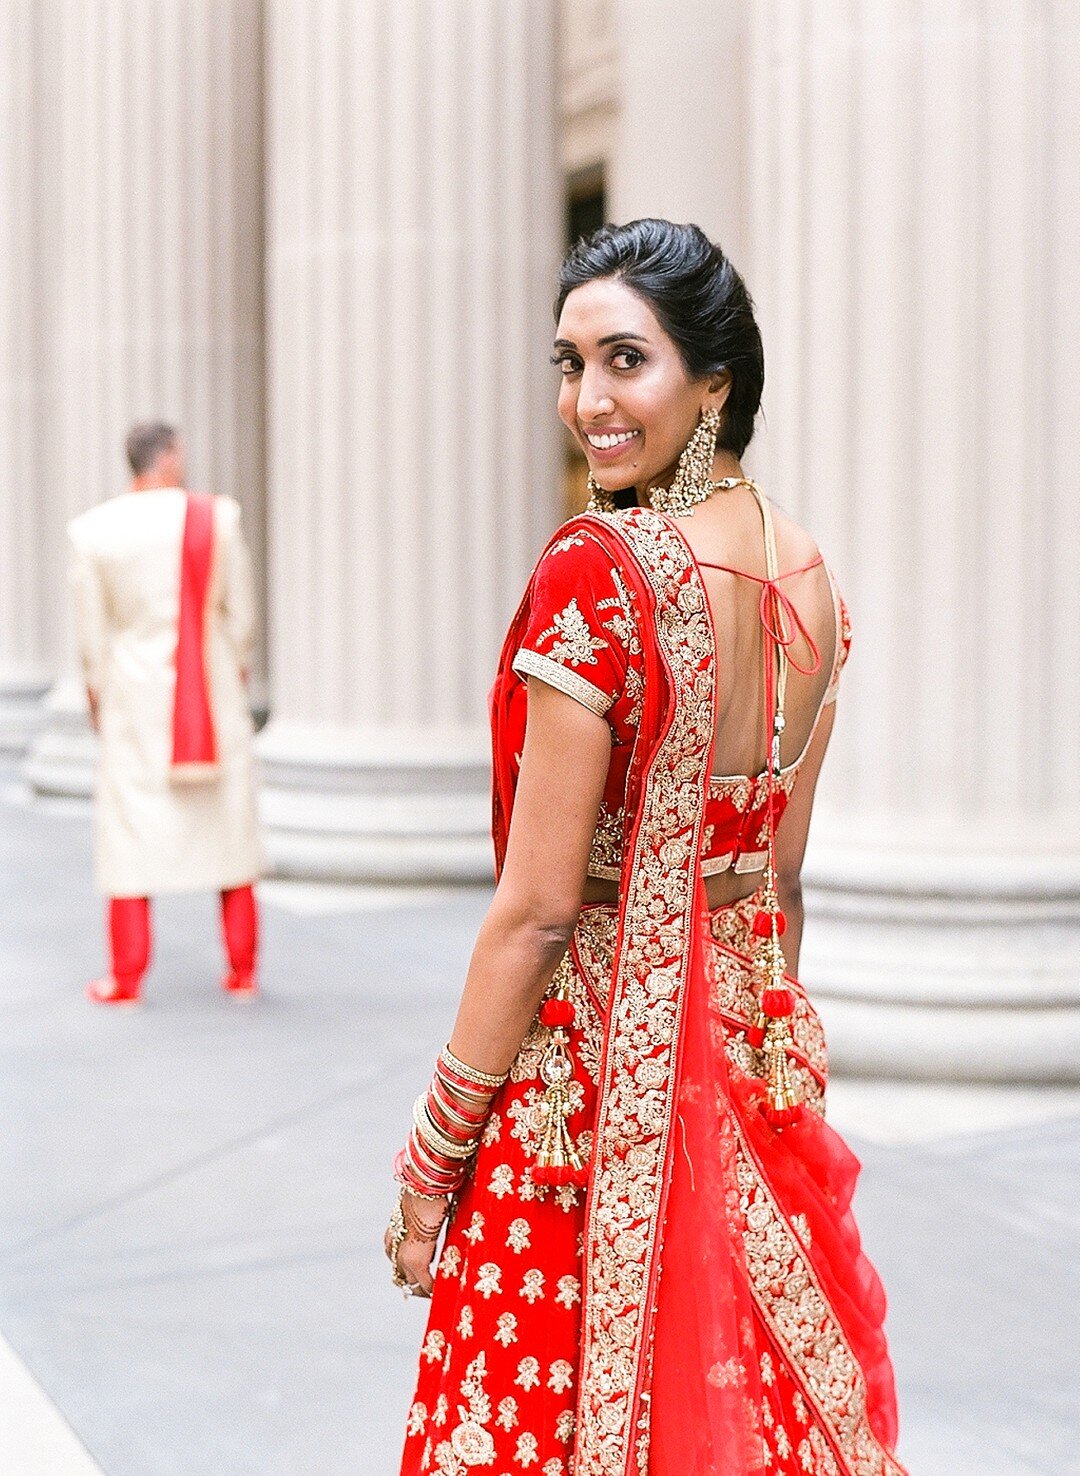 Multicultural Colorful Wedding in Chicago captured by Bonphotage | CHI thee WED